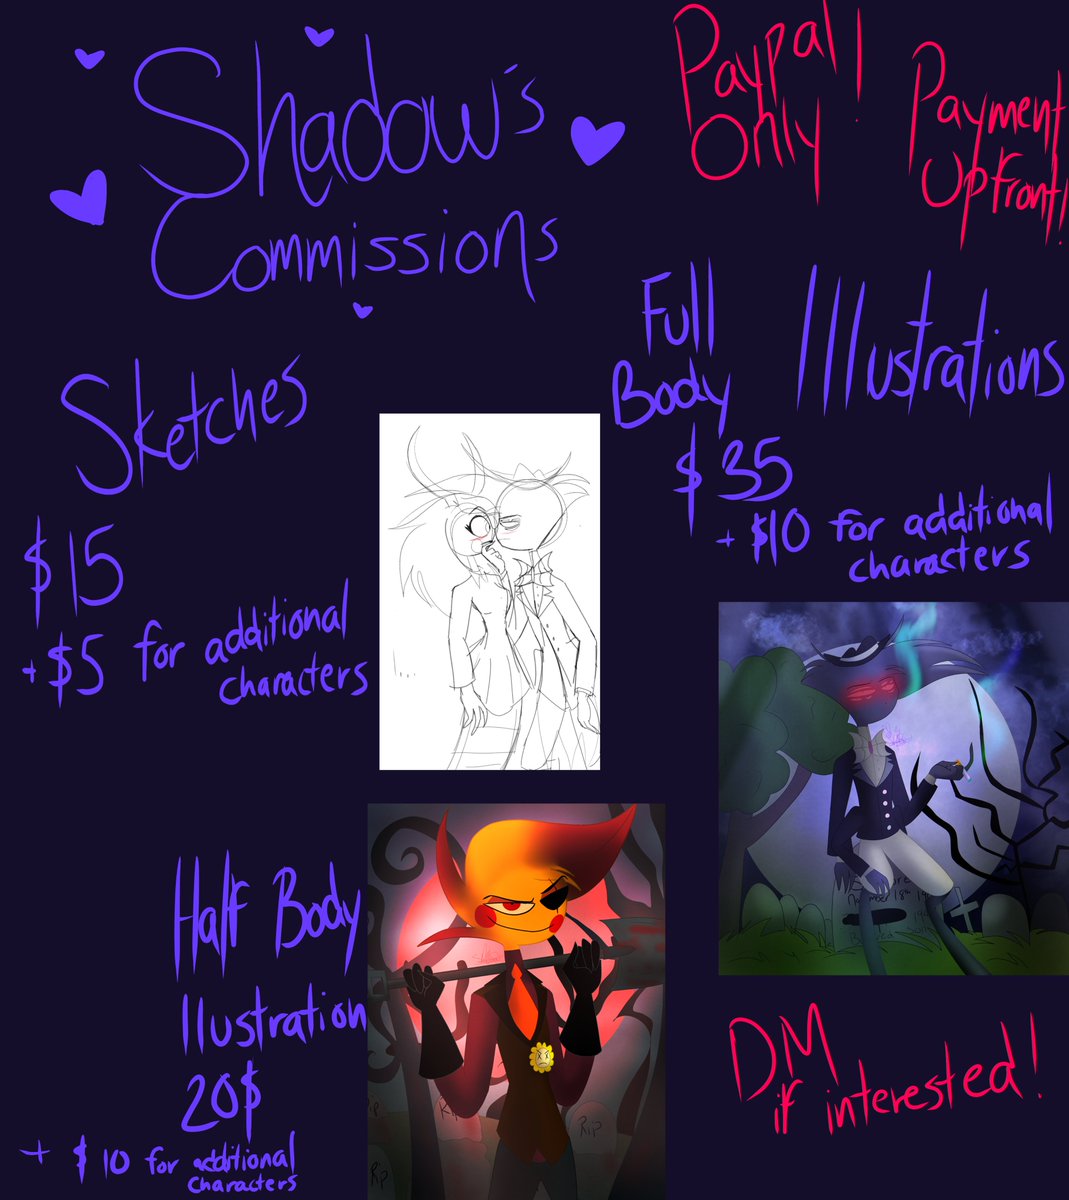 My commissions are open!!

I only accept paypal, and payment must be upfront 

NO NSFW,  FETISHES, OR SUPER COMPLICATED CHARACTERS
#commissionsopen #Commission #CommissionSheet #commissions